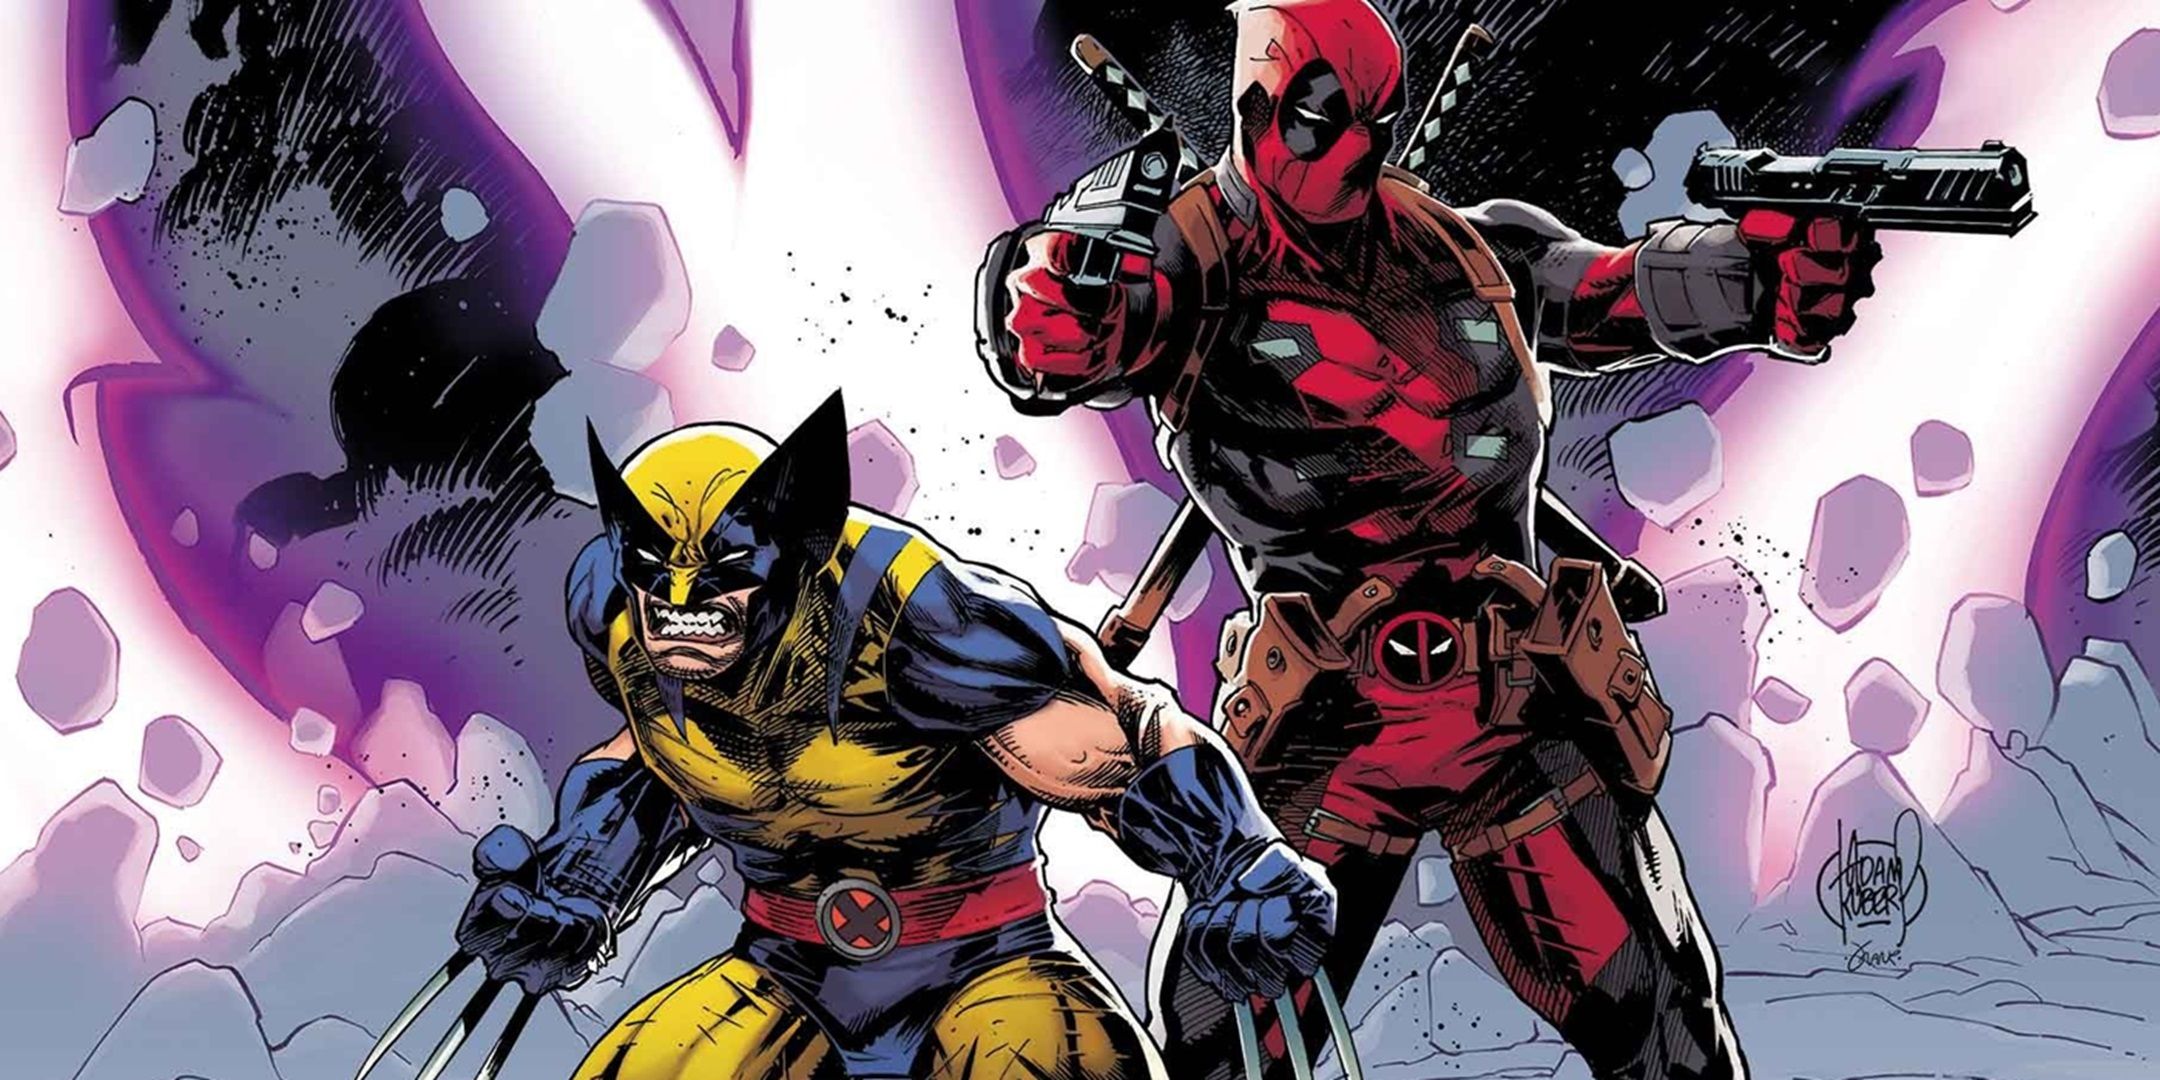 Wolverine and Deadpool fighting together